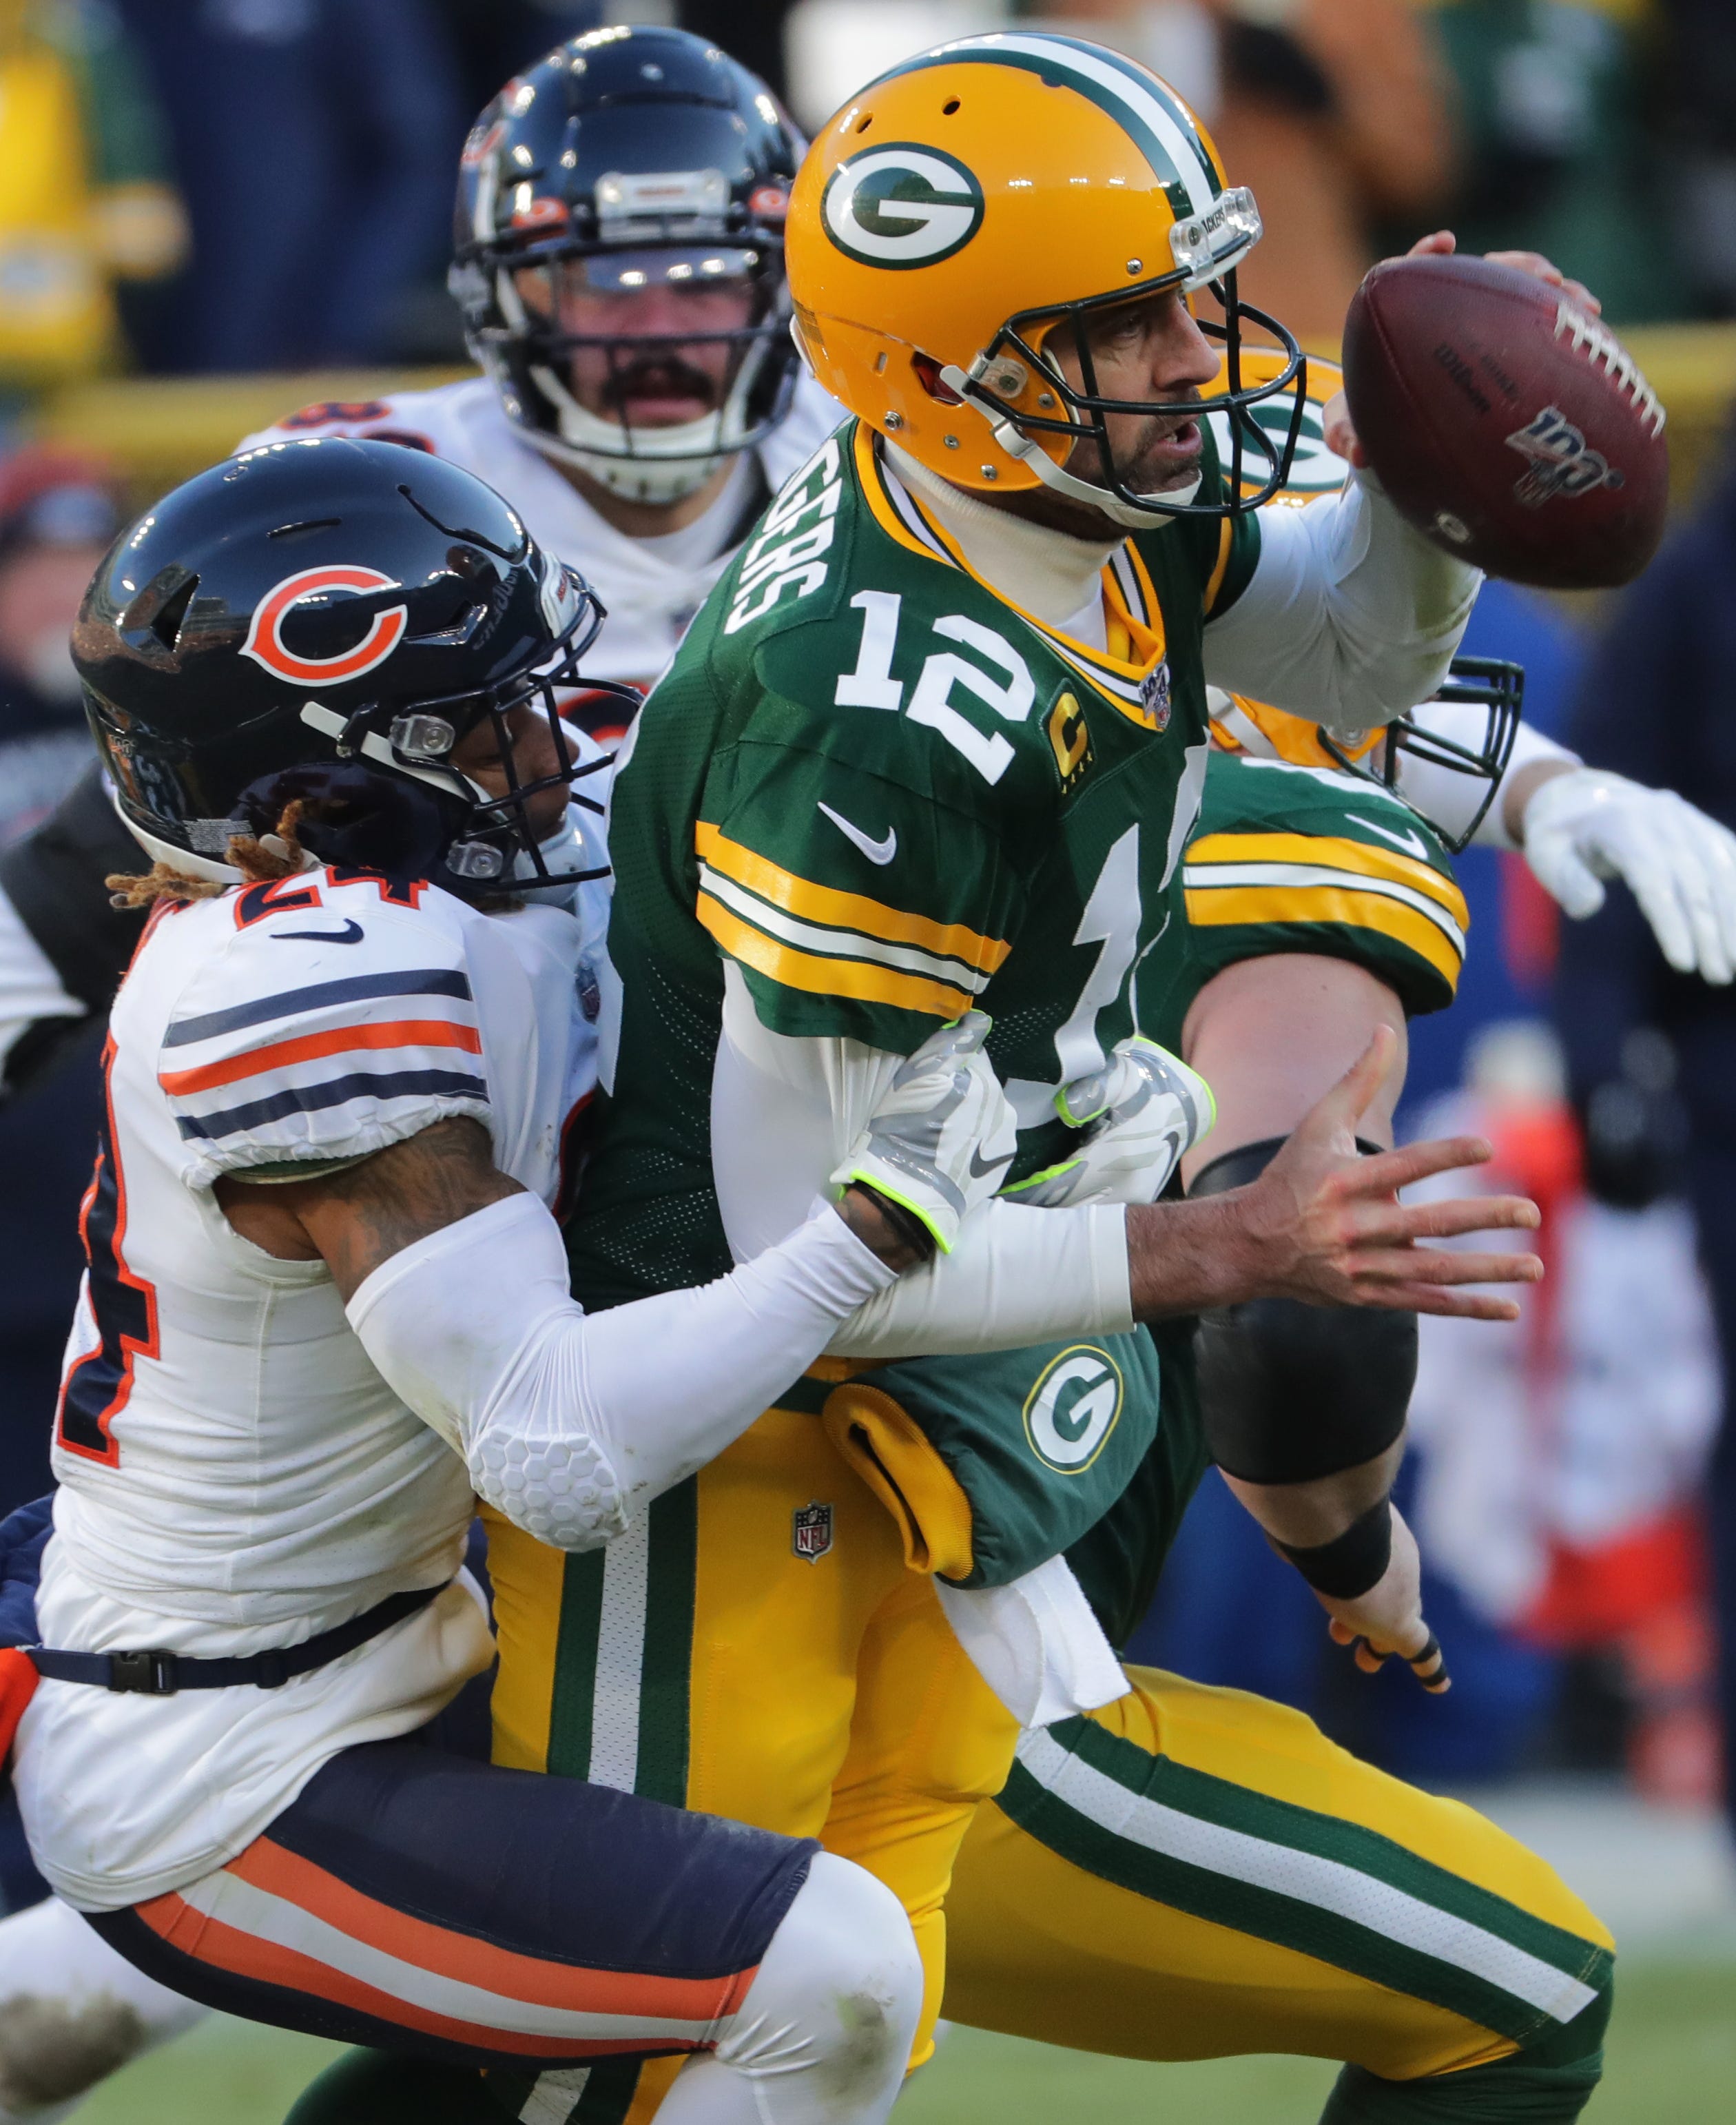 Green Bay Packers quarterback Aaron Rodgers (12) manages to avoid a sack bystander Chicago Bears cornerback Buster Skrine (24) during the fourth quarter of their game Sunday, December 15, 2019 at Lambeau Field in Green Bay, Wis. The Green Bay Packers beat the Chicago Bears 21-13.